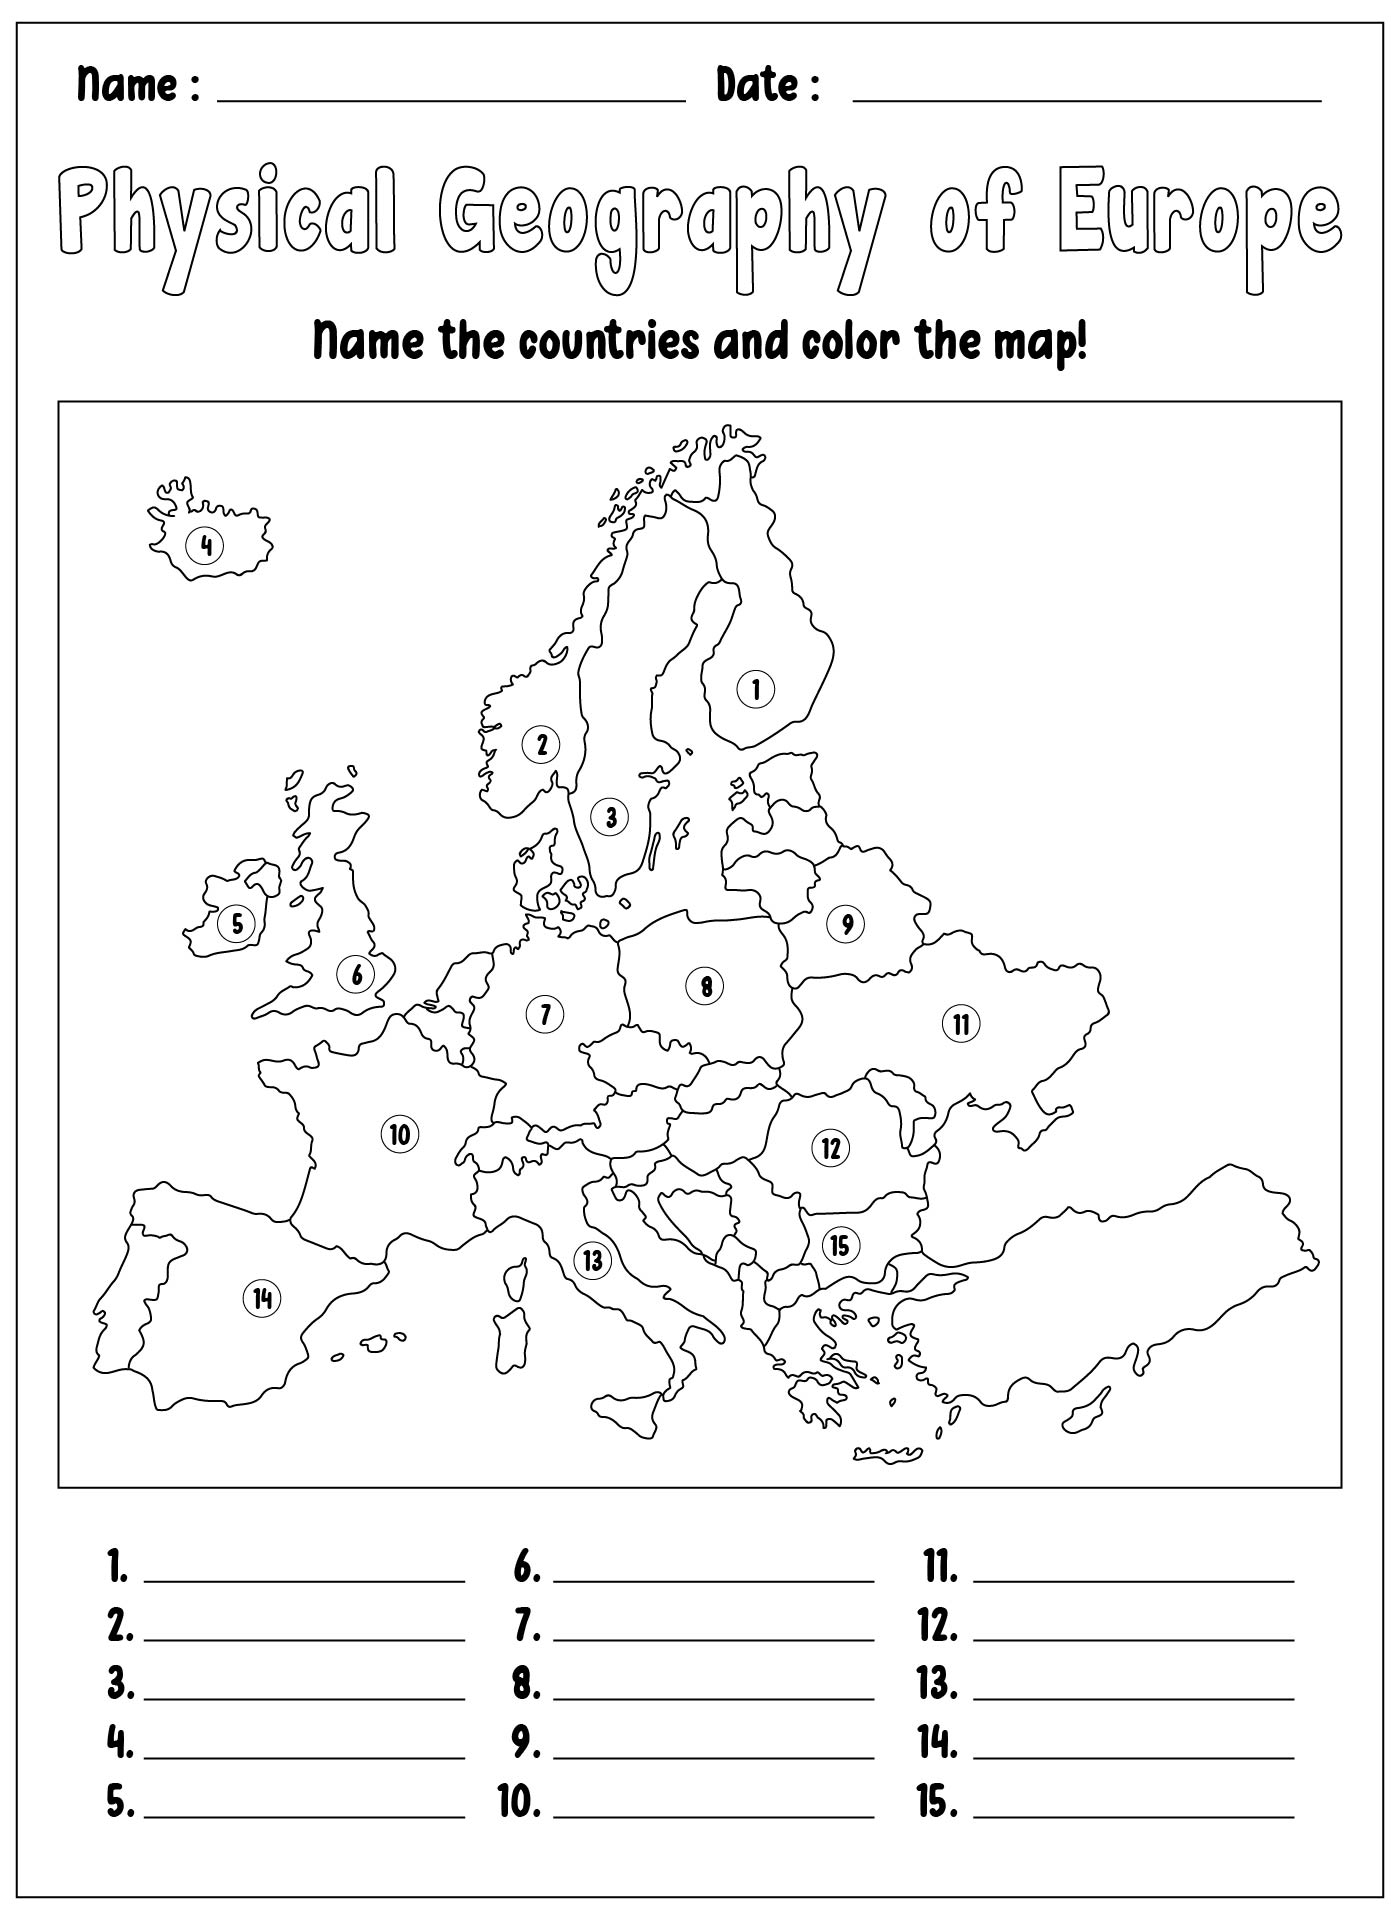 Physical Geography Of Europe Worksheet